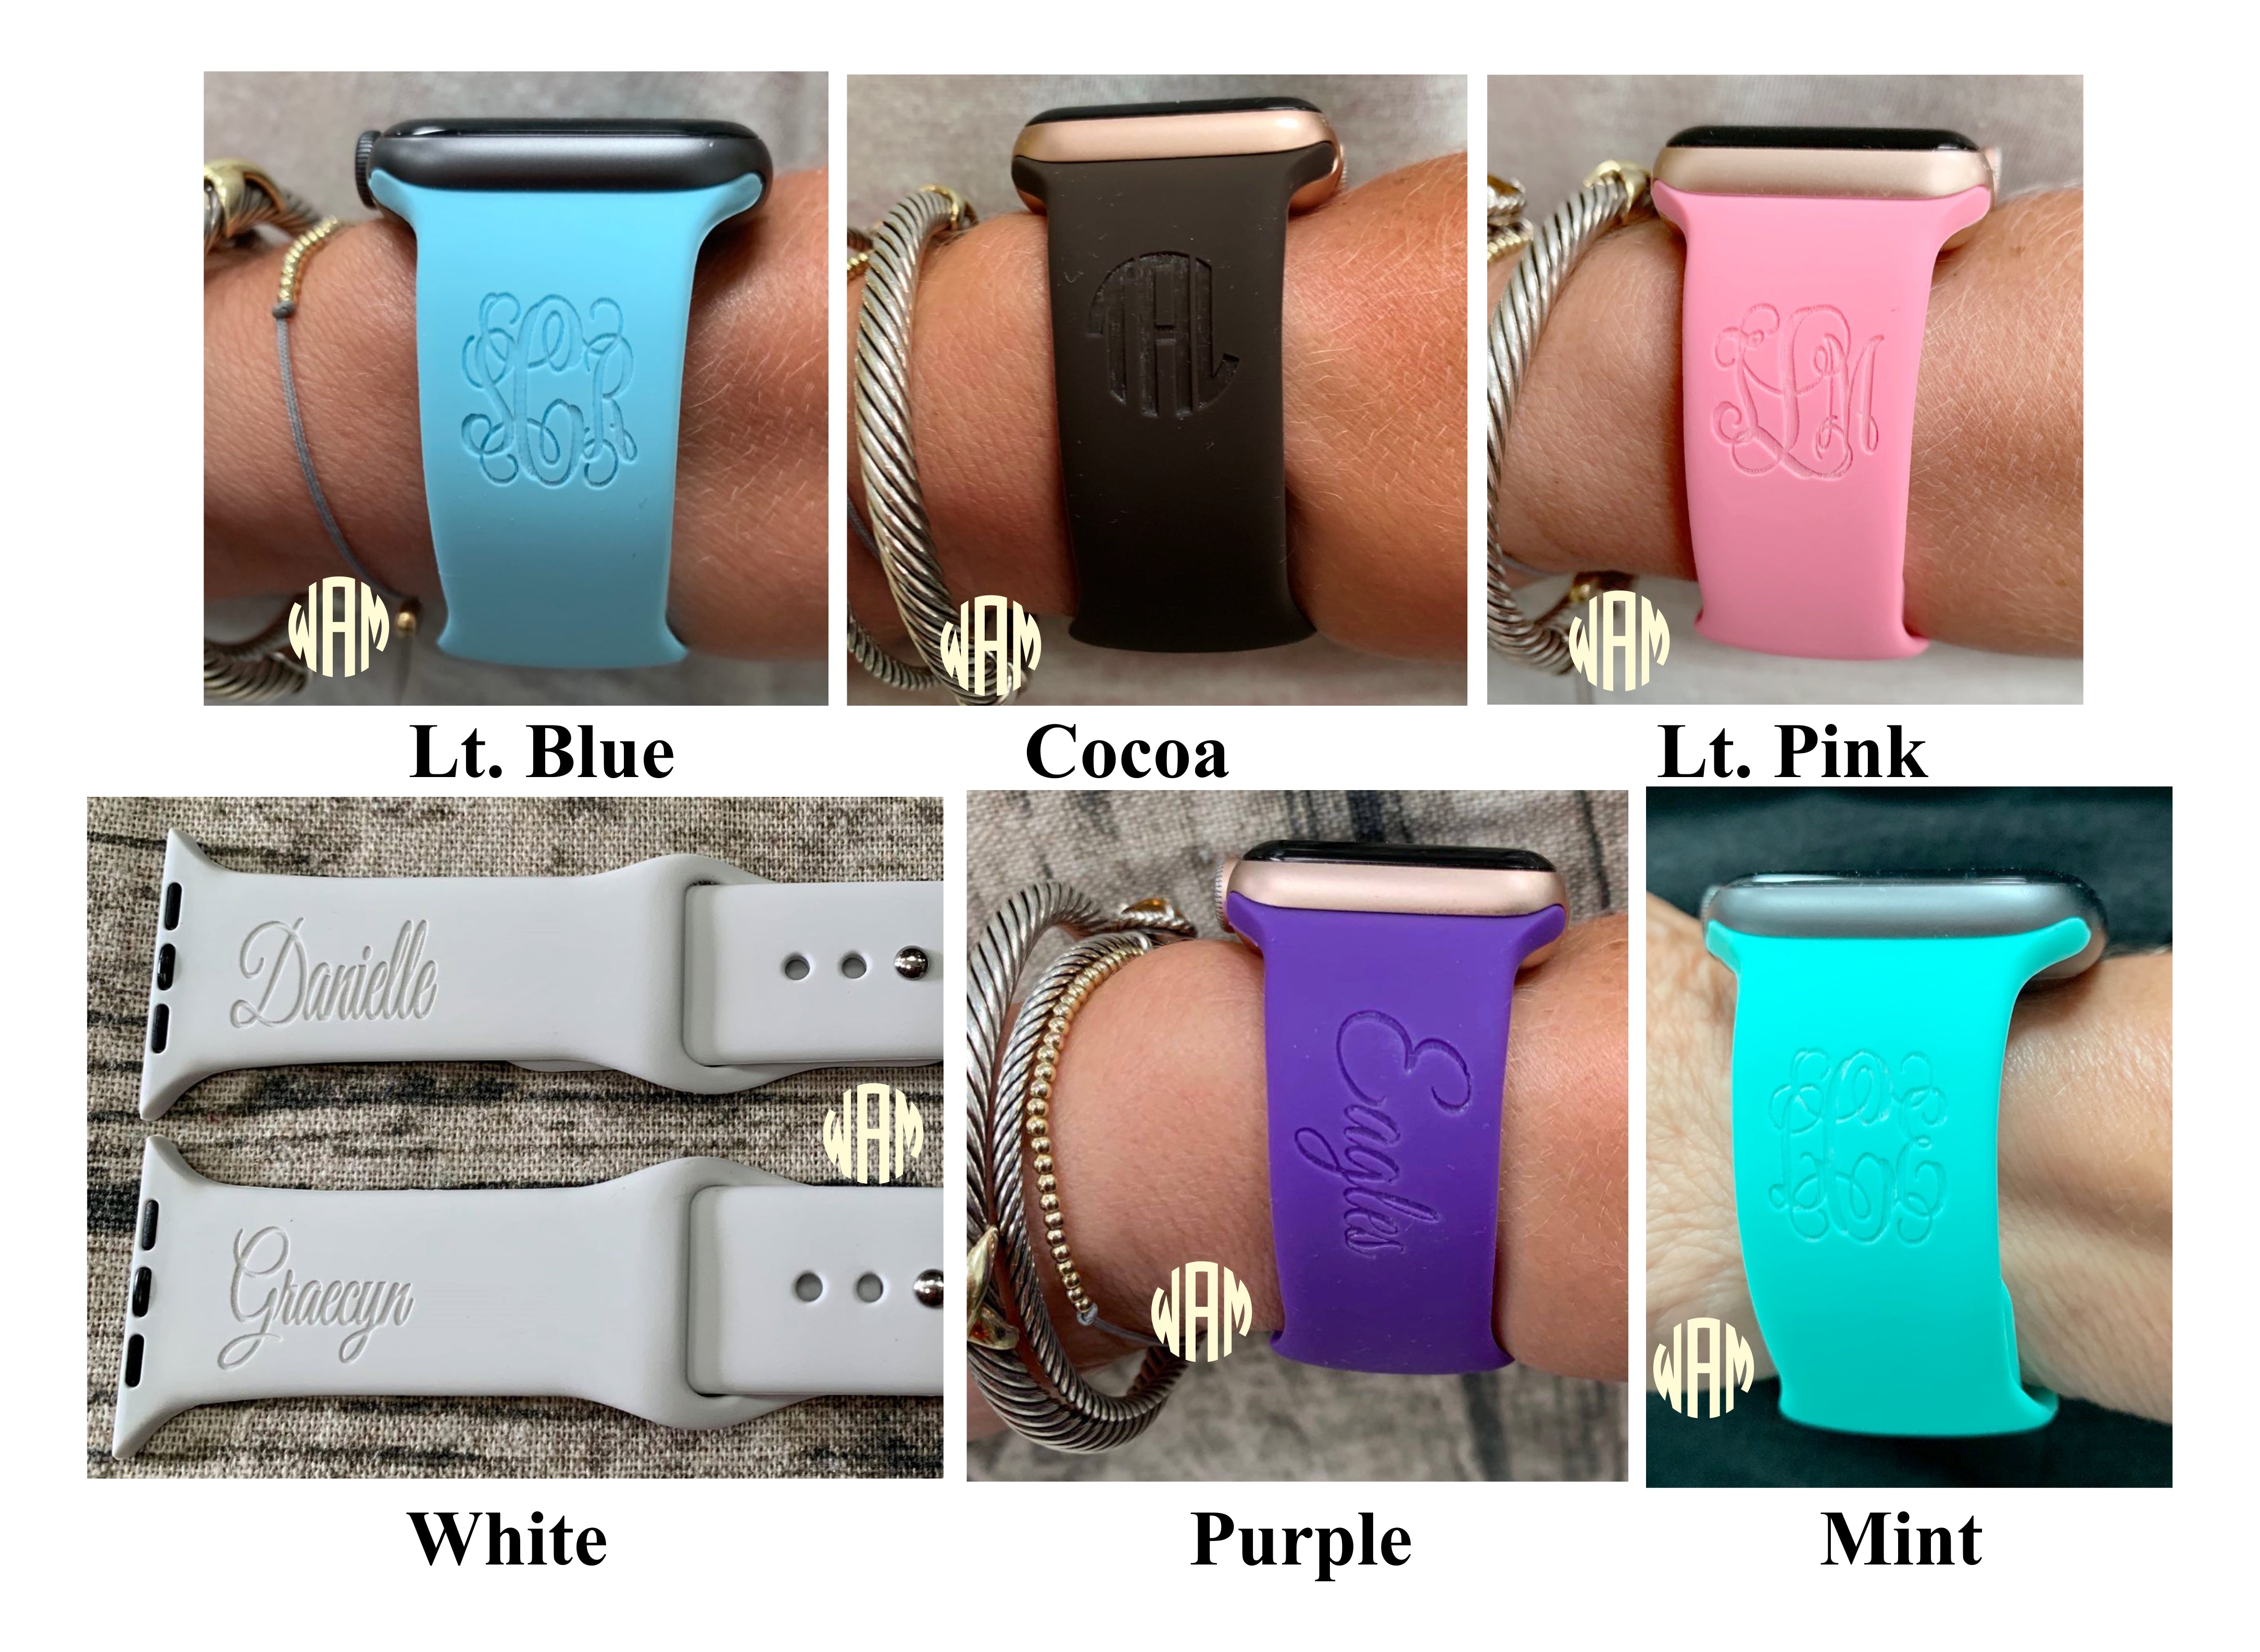 Personalized Laser Engraved Silicone Watch Band Compatible with